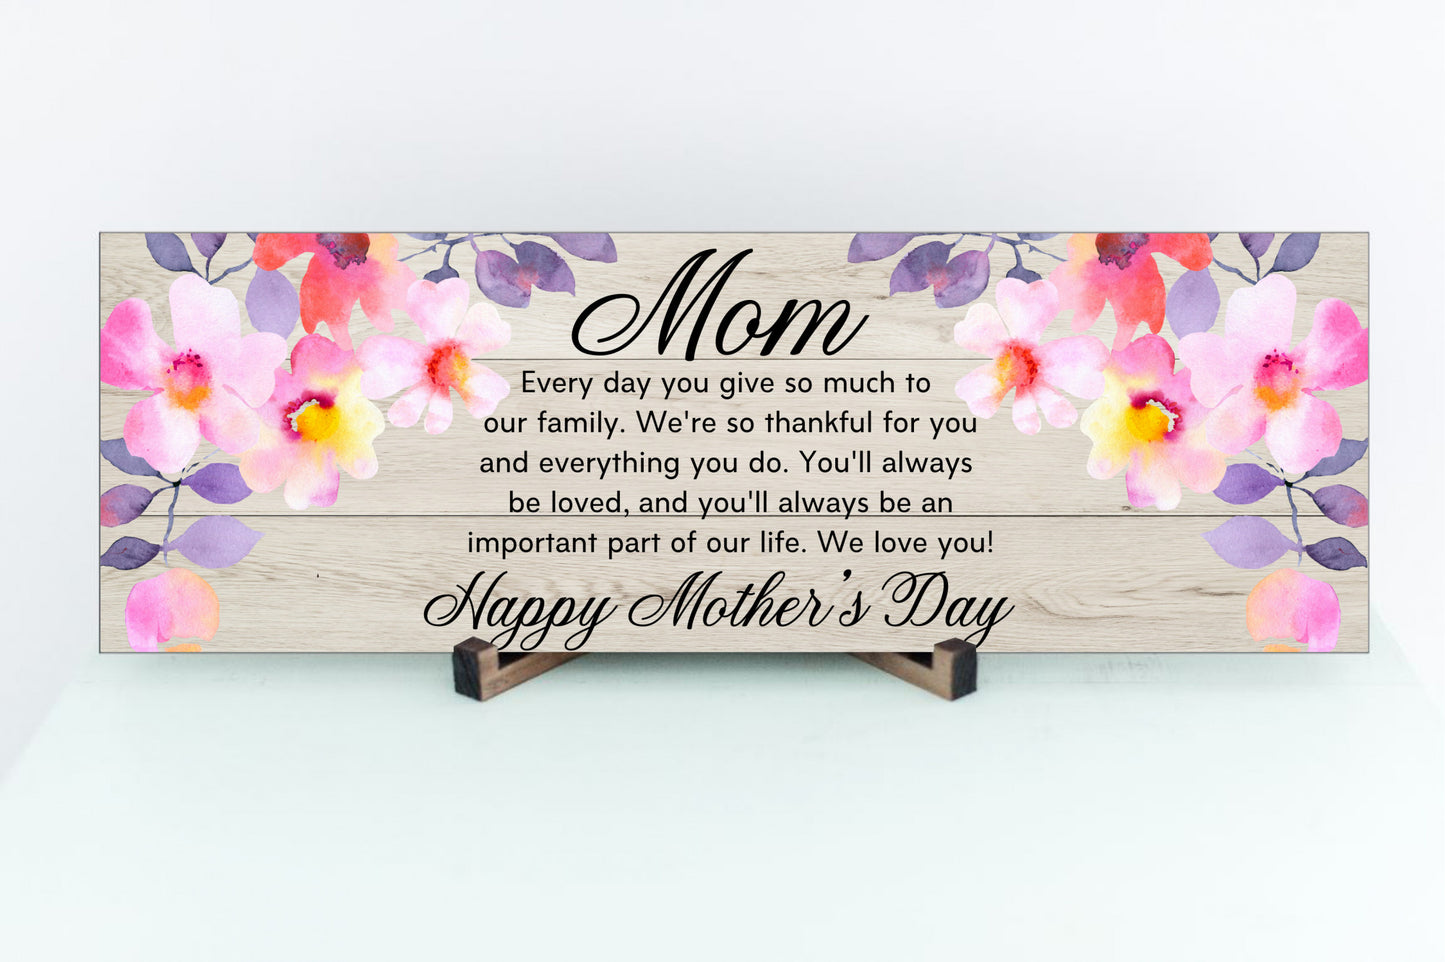 Mom Happy Mother's Day Wall or Table Display Sign - Gift for Mom